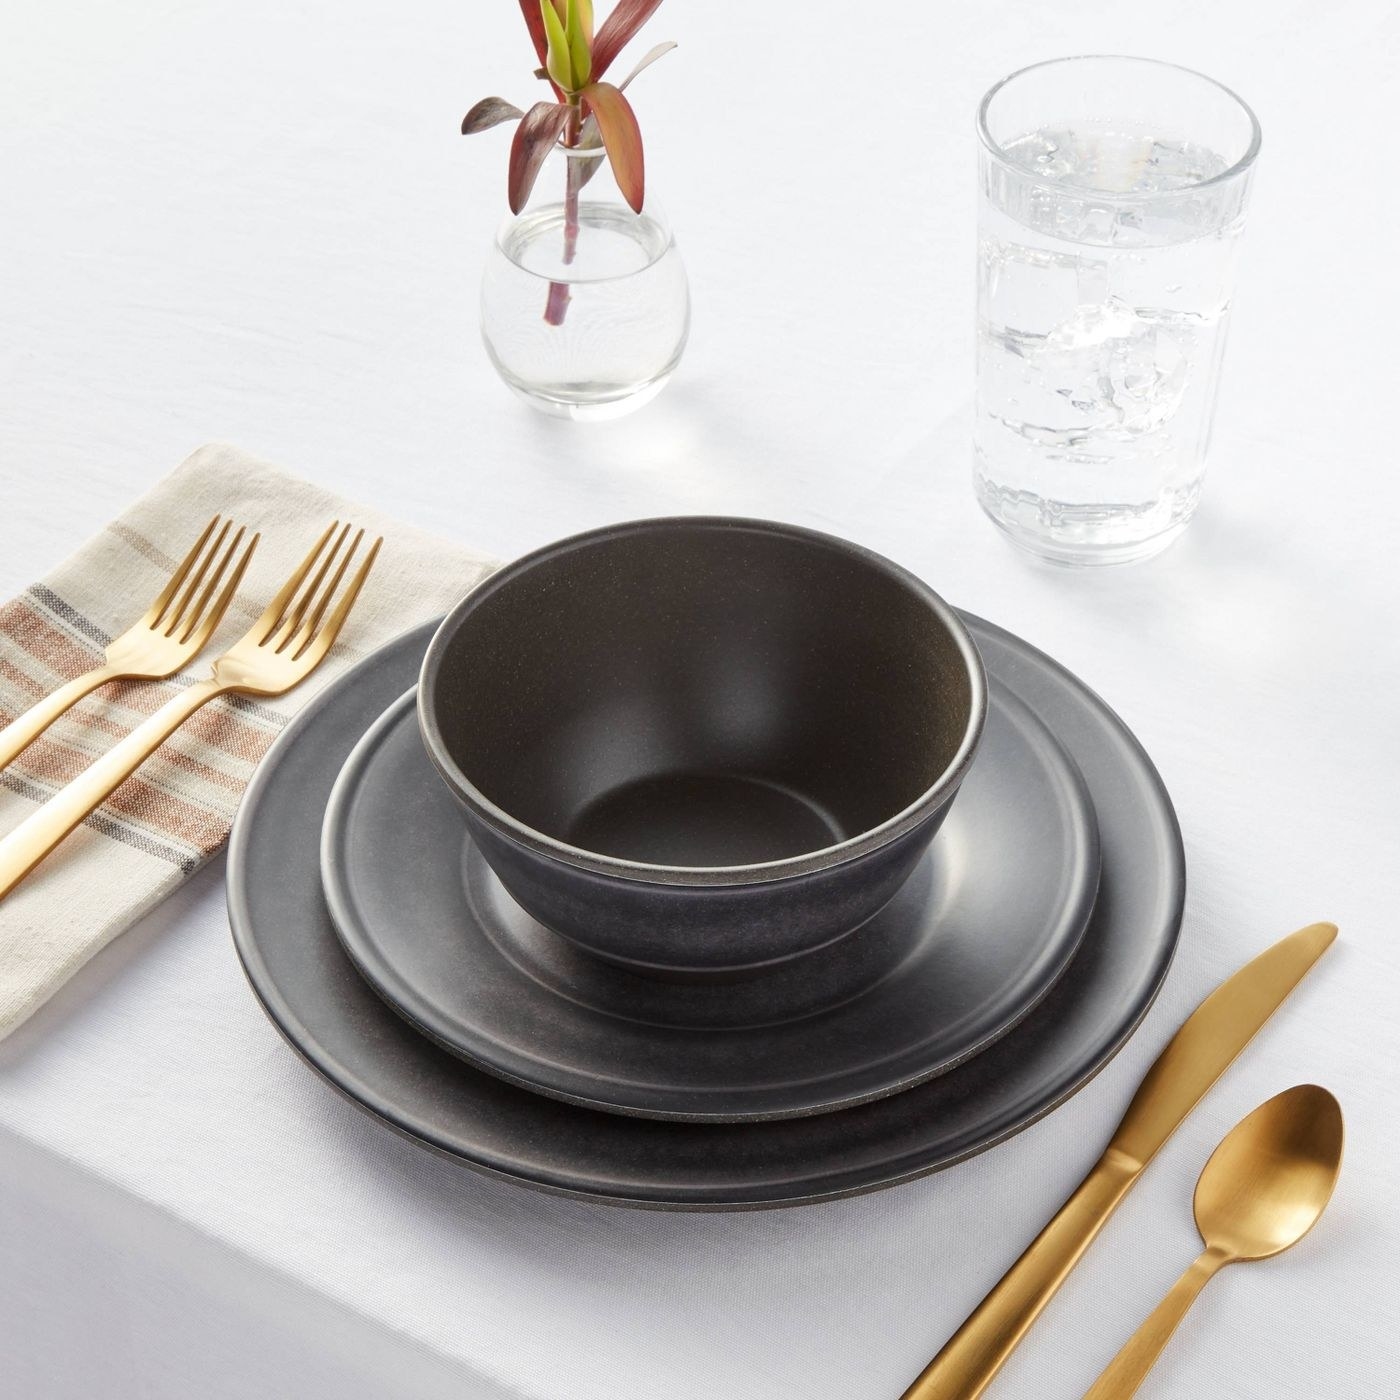 A grey set of dishes on a table with gold silverware